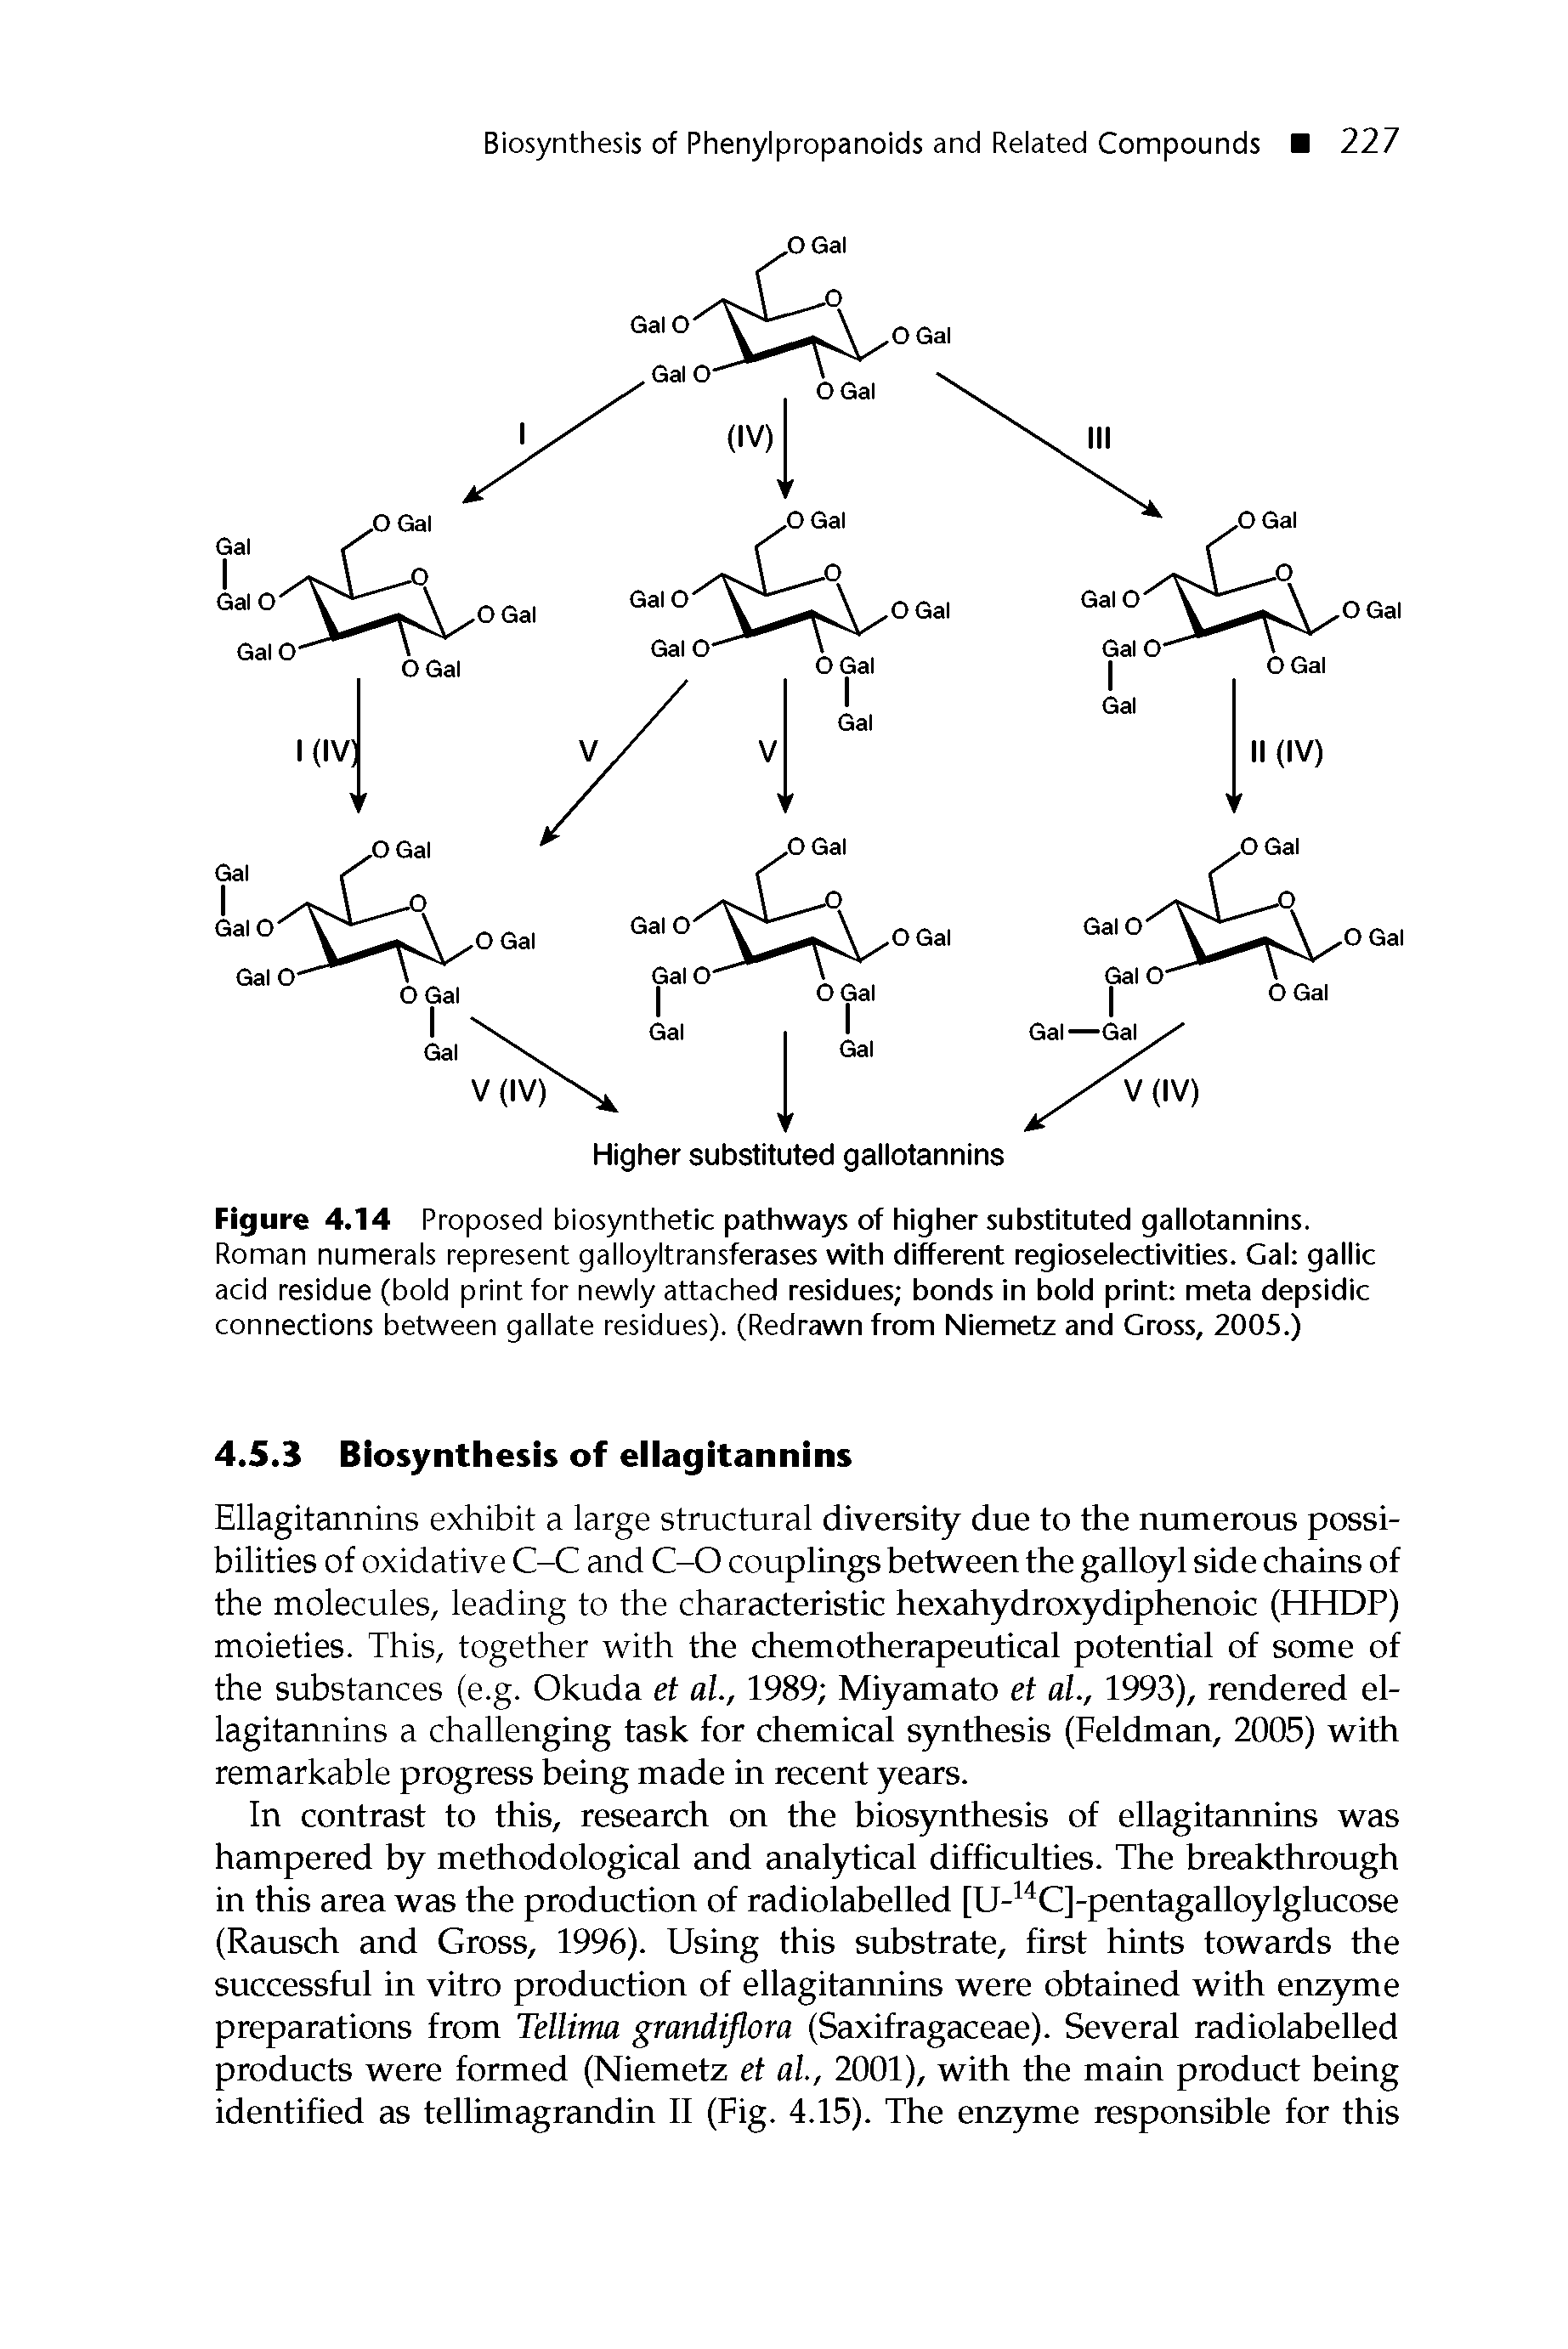 Figure 4.14 Proposed biosynthetic pathways of higher substituted gallotannins. Roman numerals represent galloyltransferases with different regioselectivities. Gal gallic acid residue (bold print for newly attached residues bonds in bold print meta depsidic connections between gallate residues). (Redrawn from Niemetz and Gross, 2005.)...